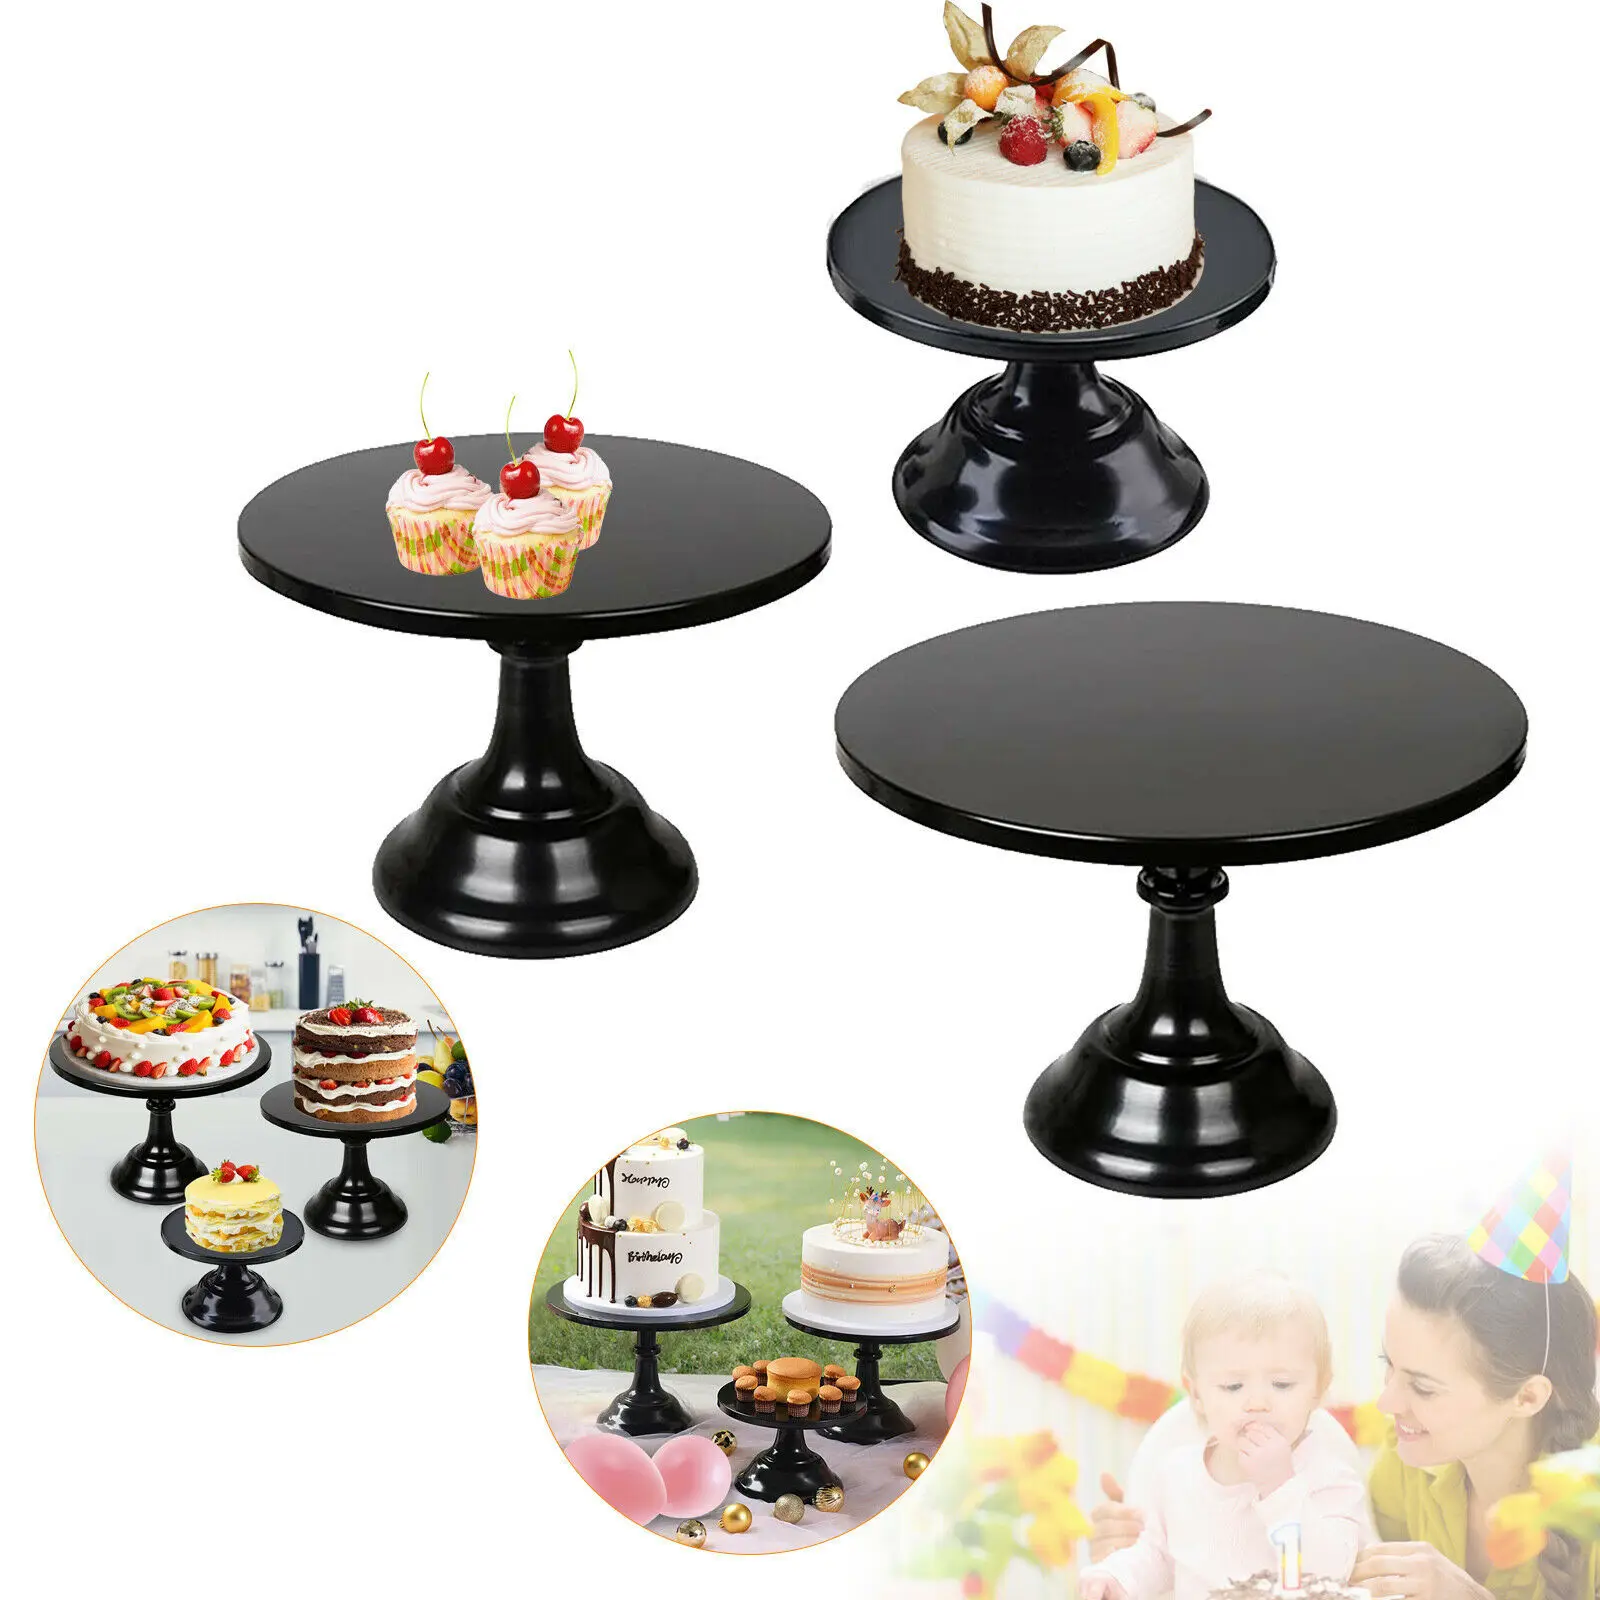 

Cake Stand Home Party Dessert Table Display Rack Dessert Cake Tray Cold Meal Tea Break Table Afternoon Tea Center Rack Metal